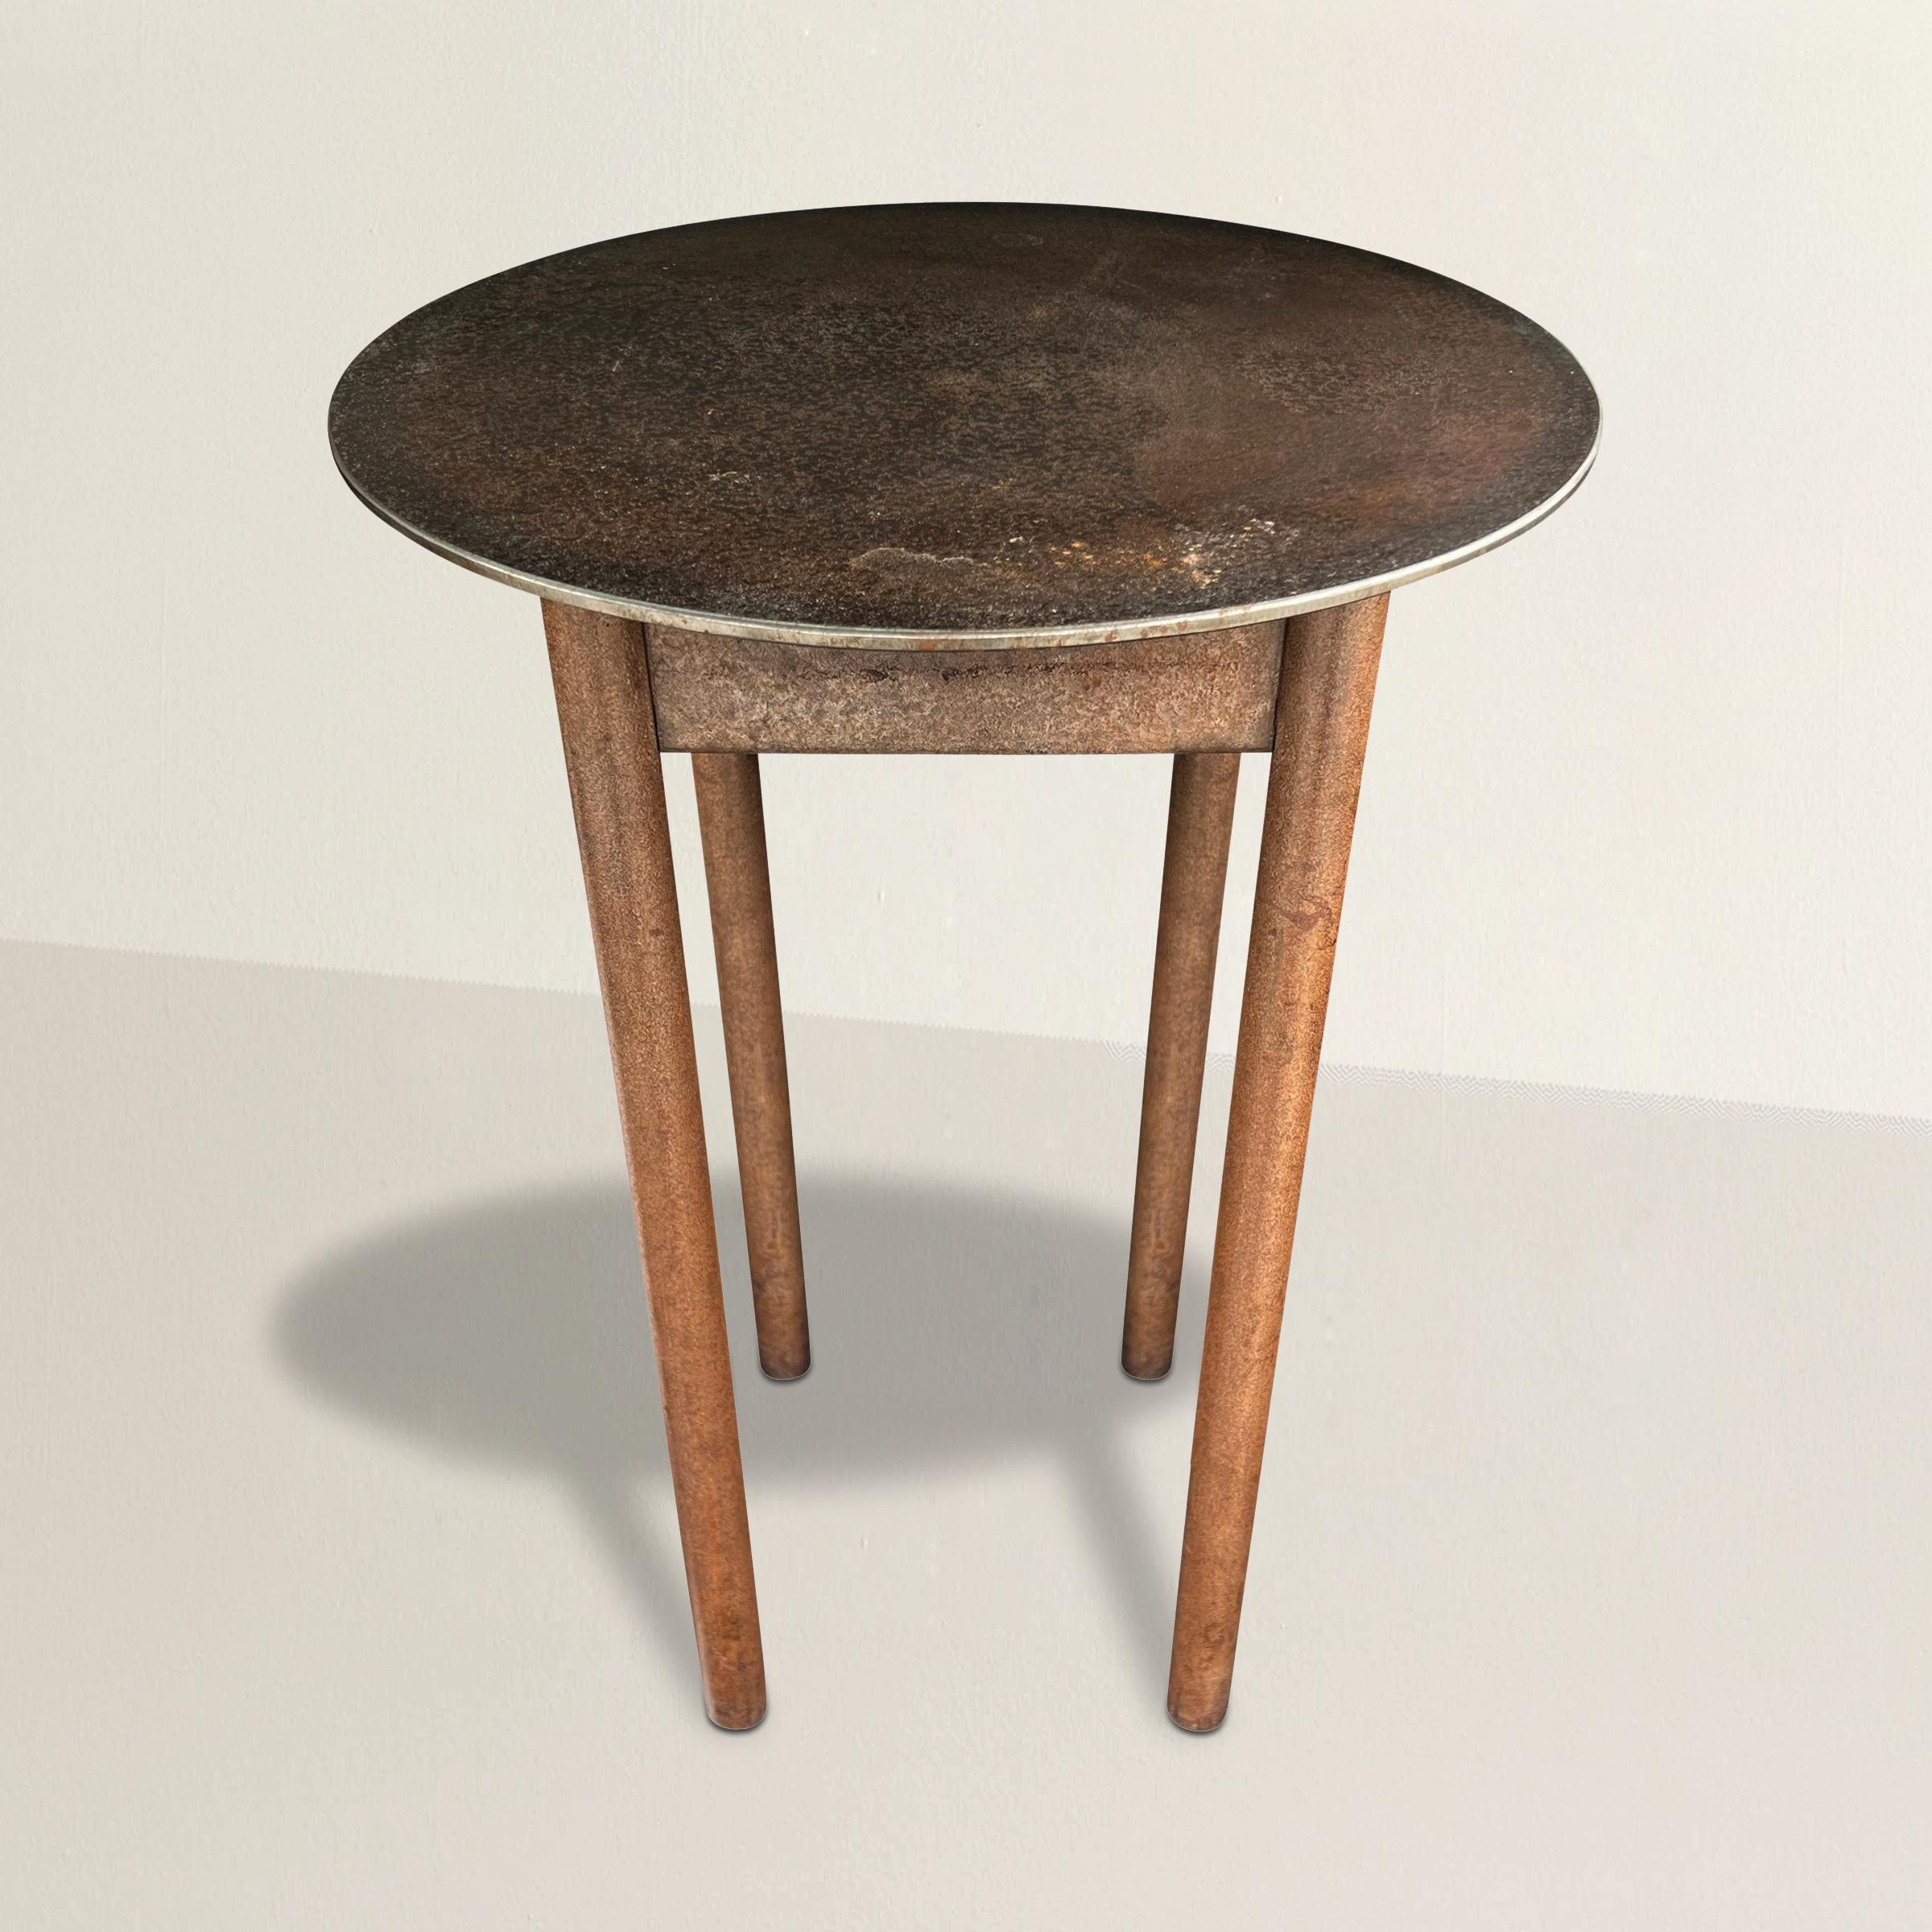 A simple but sophisticated American Shaker-inspired steel side table with a round top supported by four round legs and a simple square apron. The perfect table to place next to your sofa, favorite armchair, at your bed side, or used as a pedestal